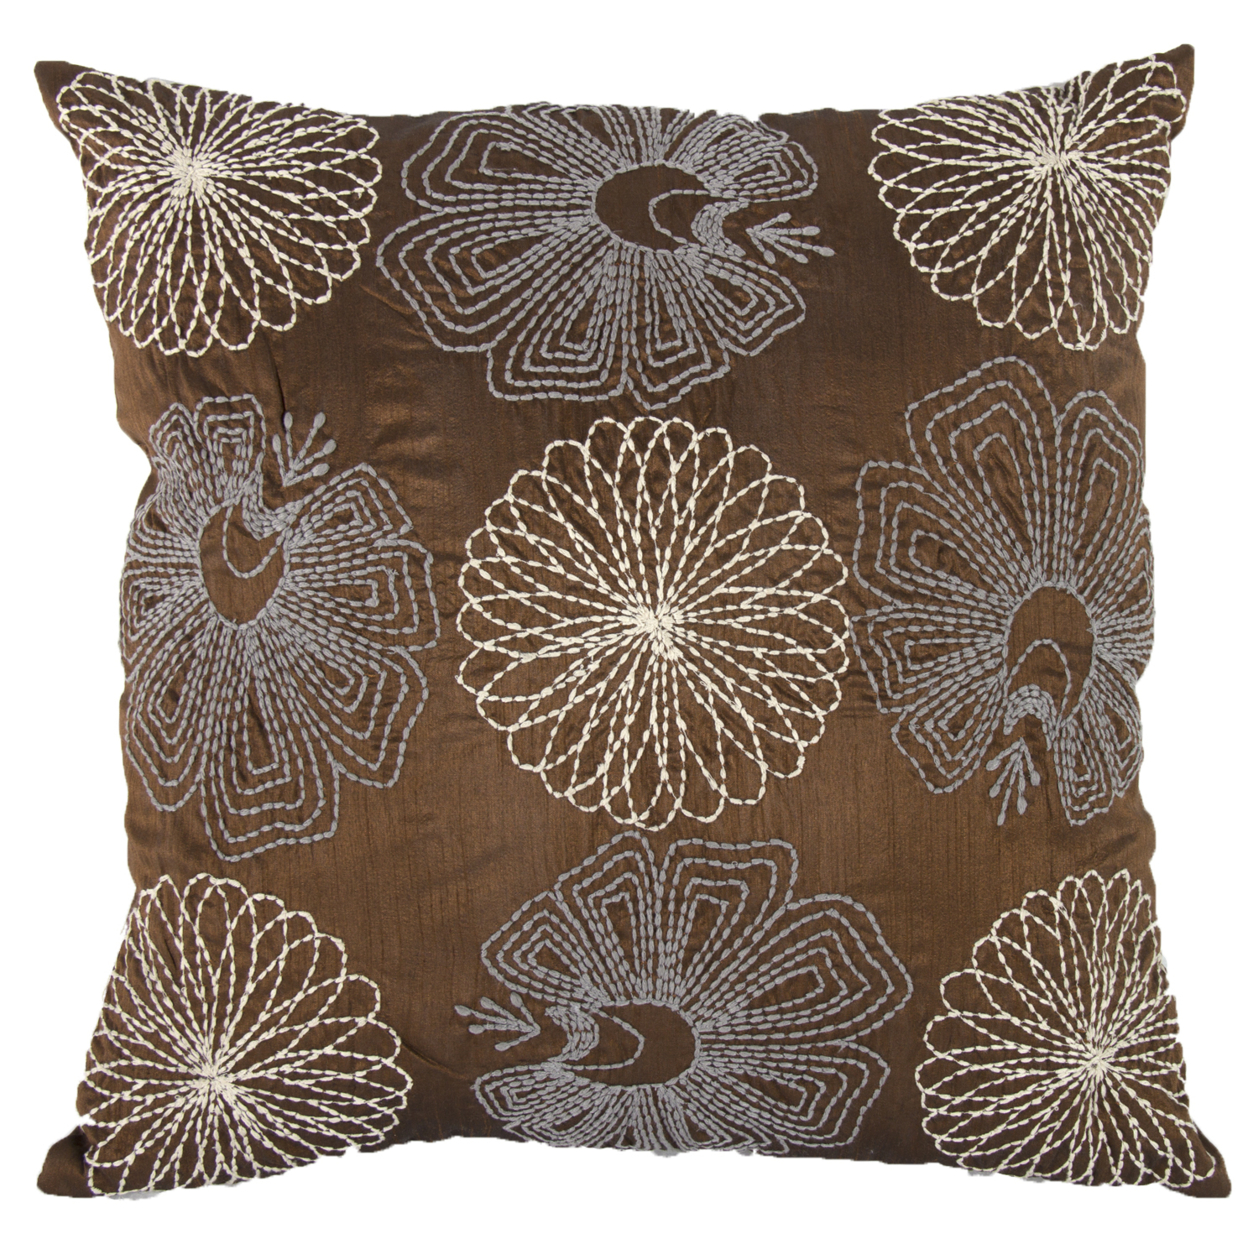 18 X 18 Inch Cotton Pillow With Poly Silk Embroidery, Set Of 2, Brown And White- Saltoro Sherpi